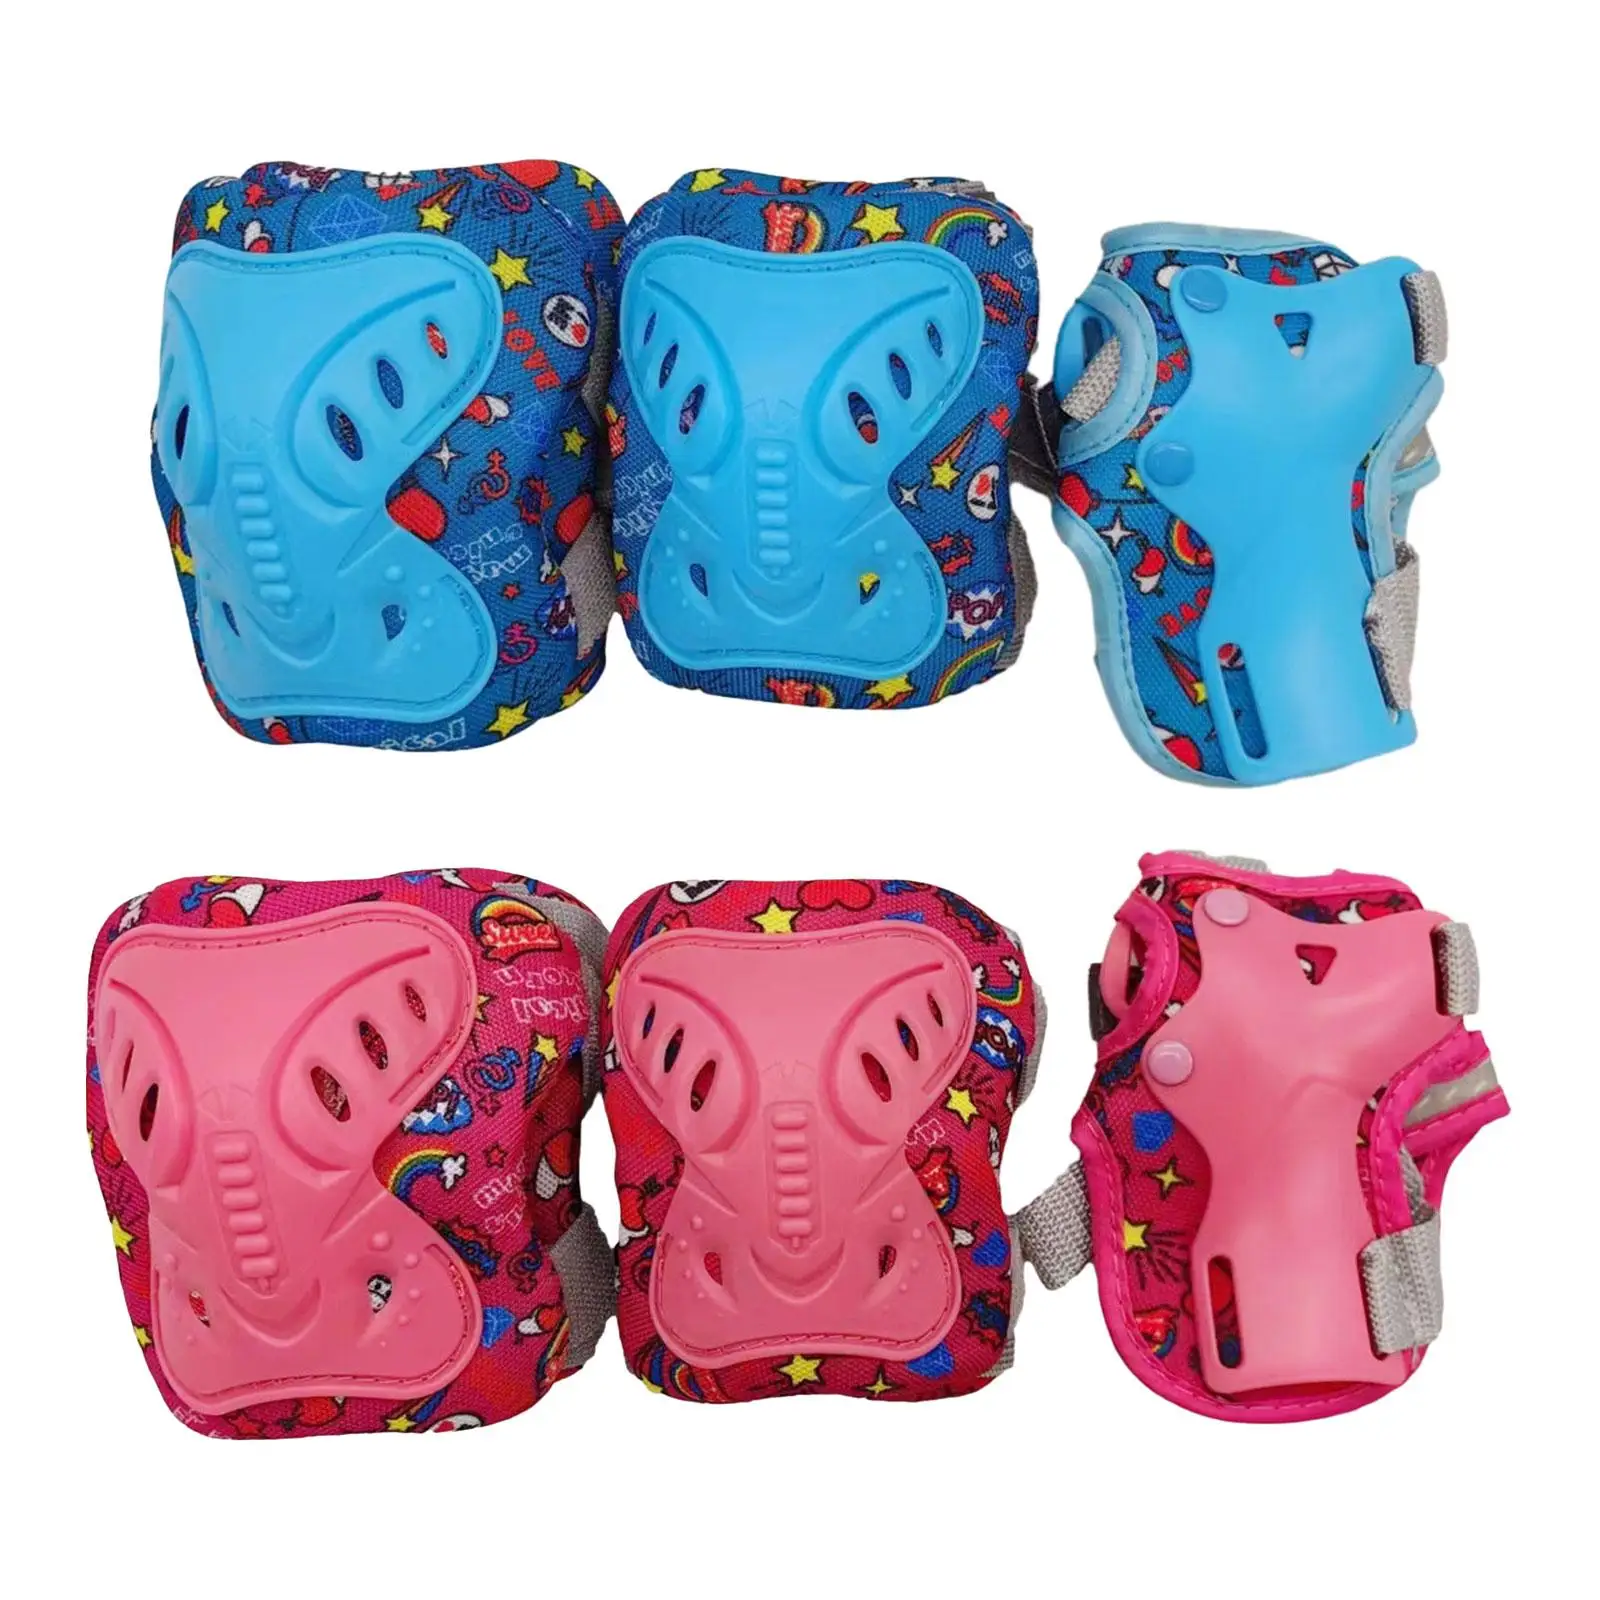 Kids Protective Gear Set Knee Elbow Wrist Pads Girls Boys Protective Guards for Climbing Outdoor Activities Rollerblading BMX